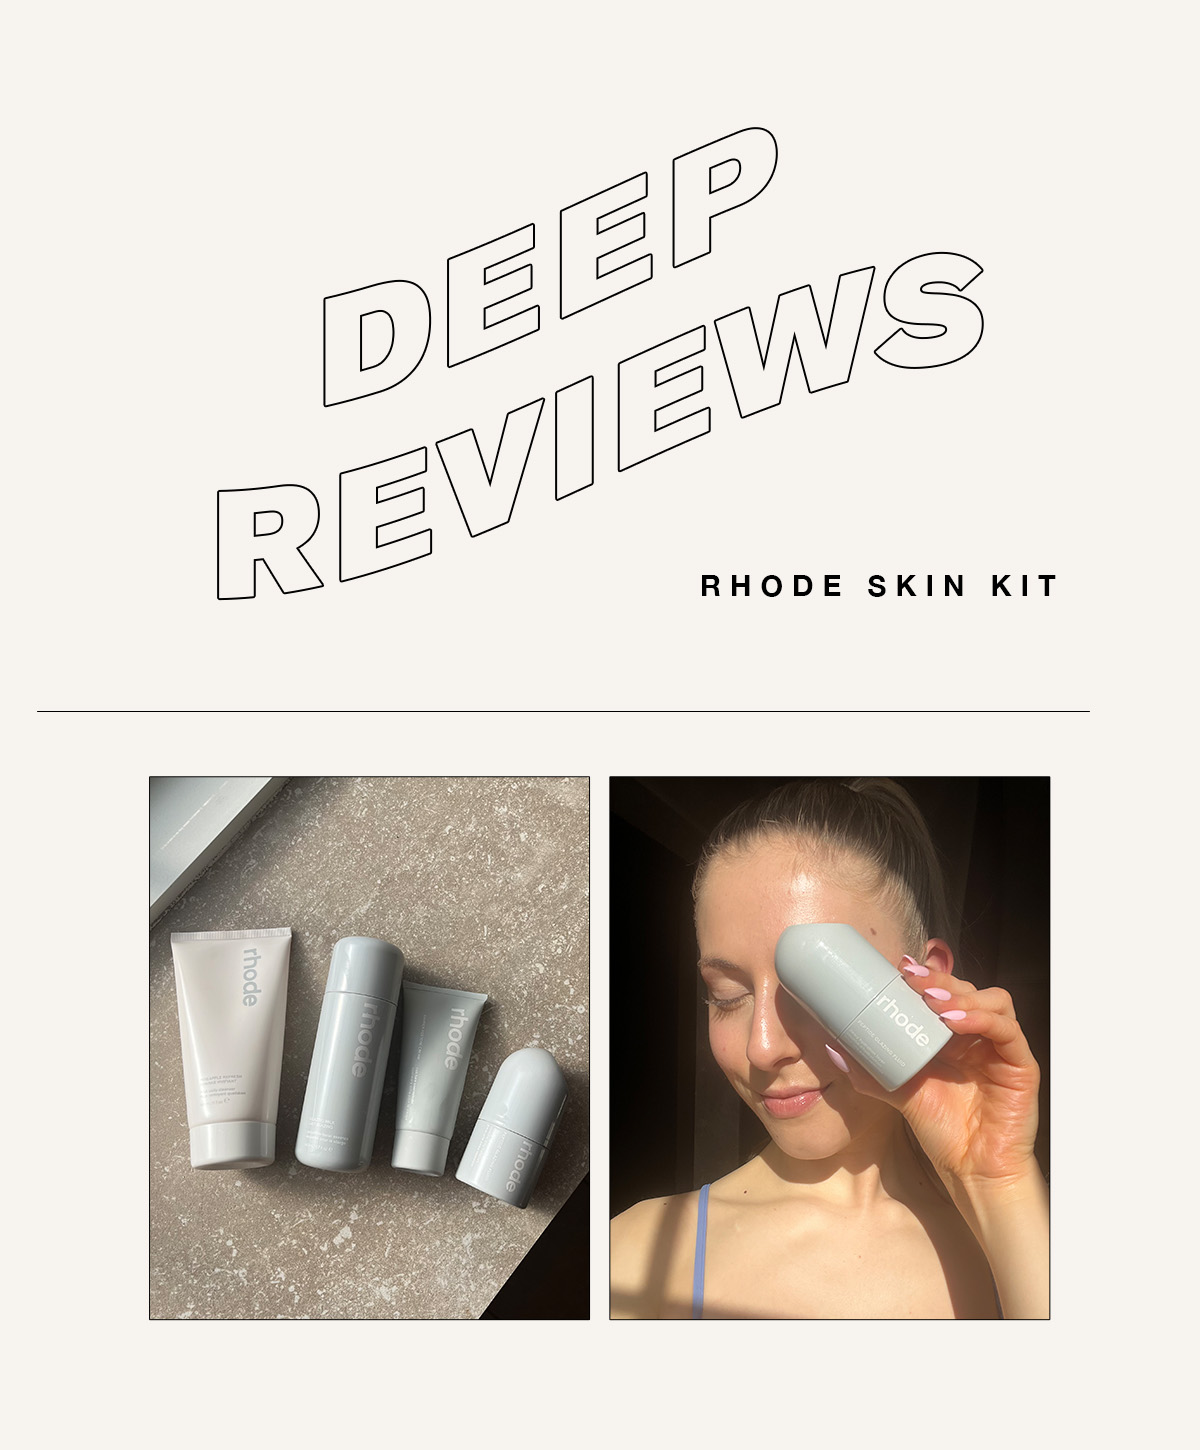 Hailey Bieber Rhode Skin Kit Review by Who What Wear editor Emma Walsh